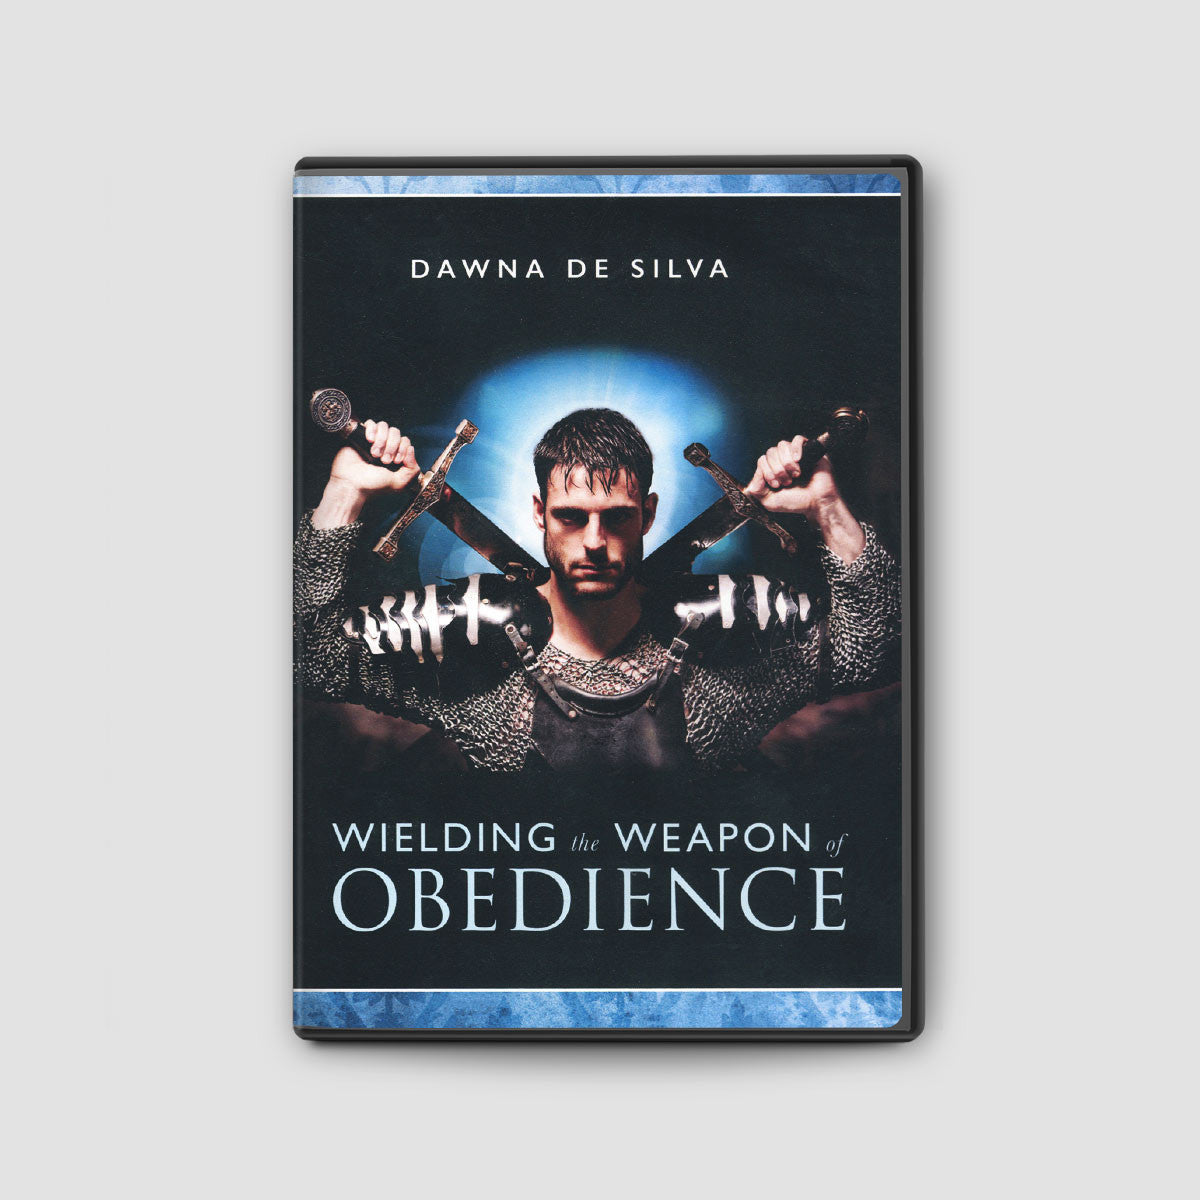 Wielding the Weapon of Obedience